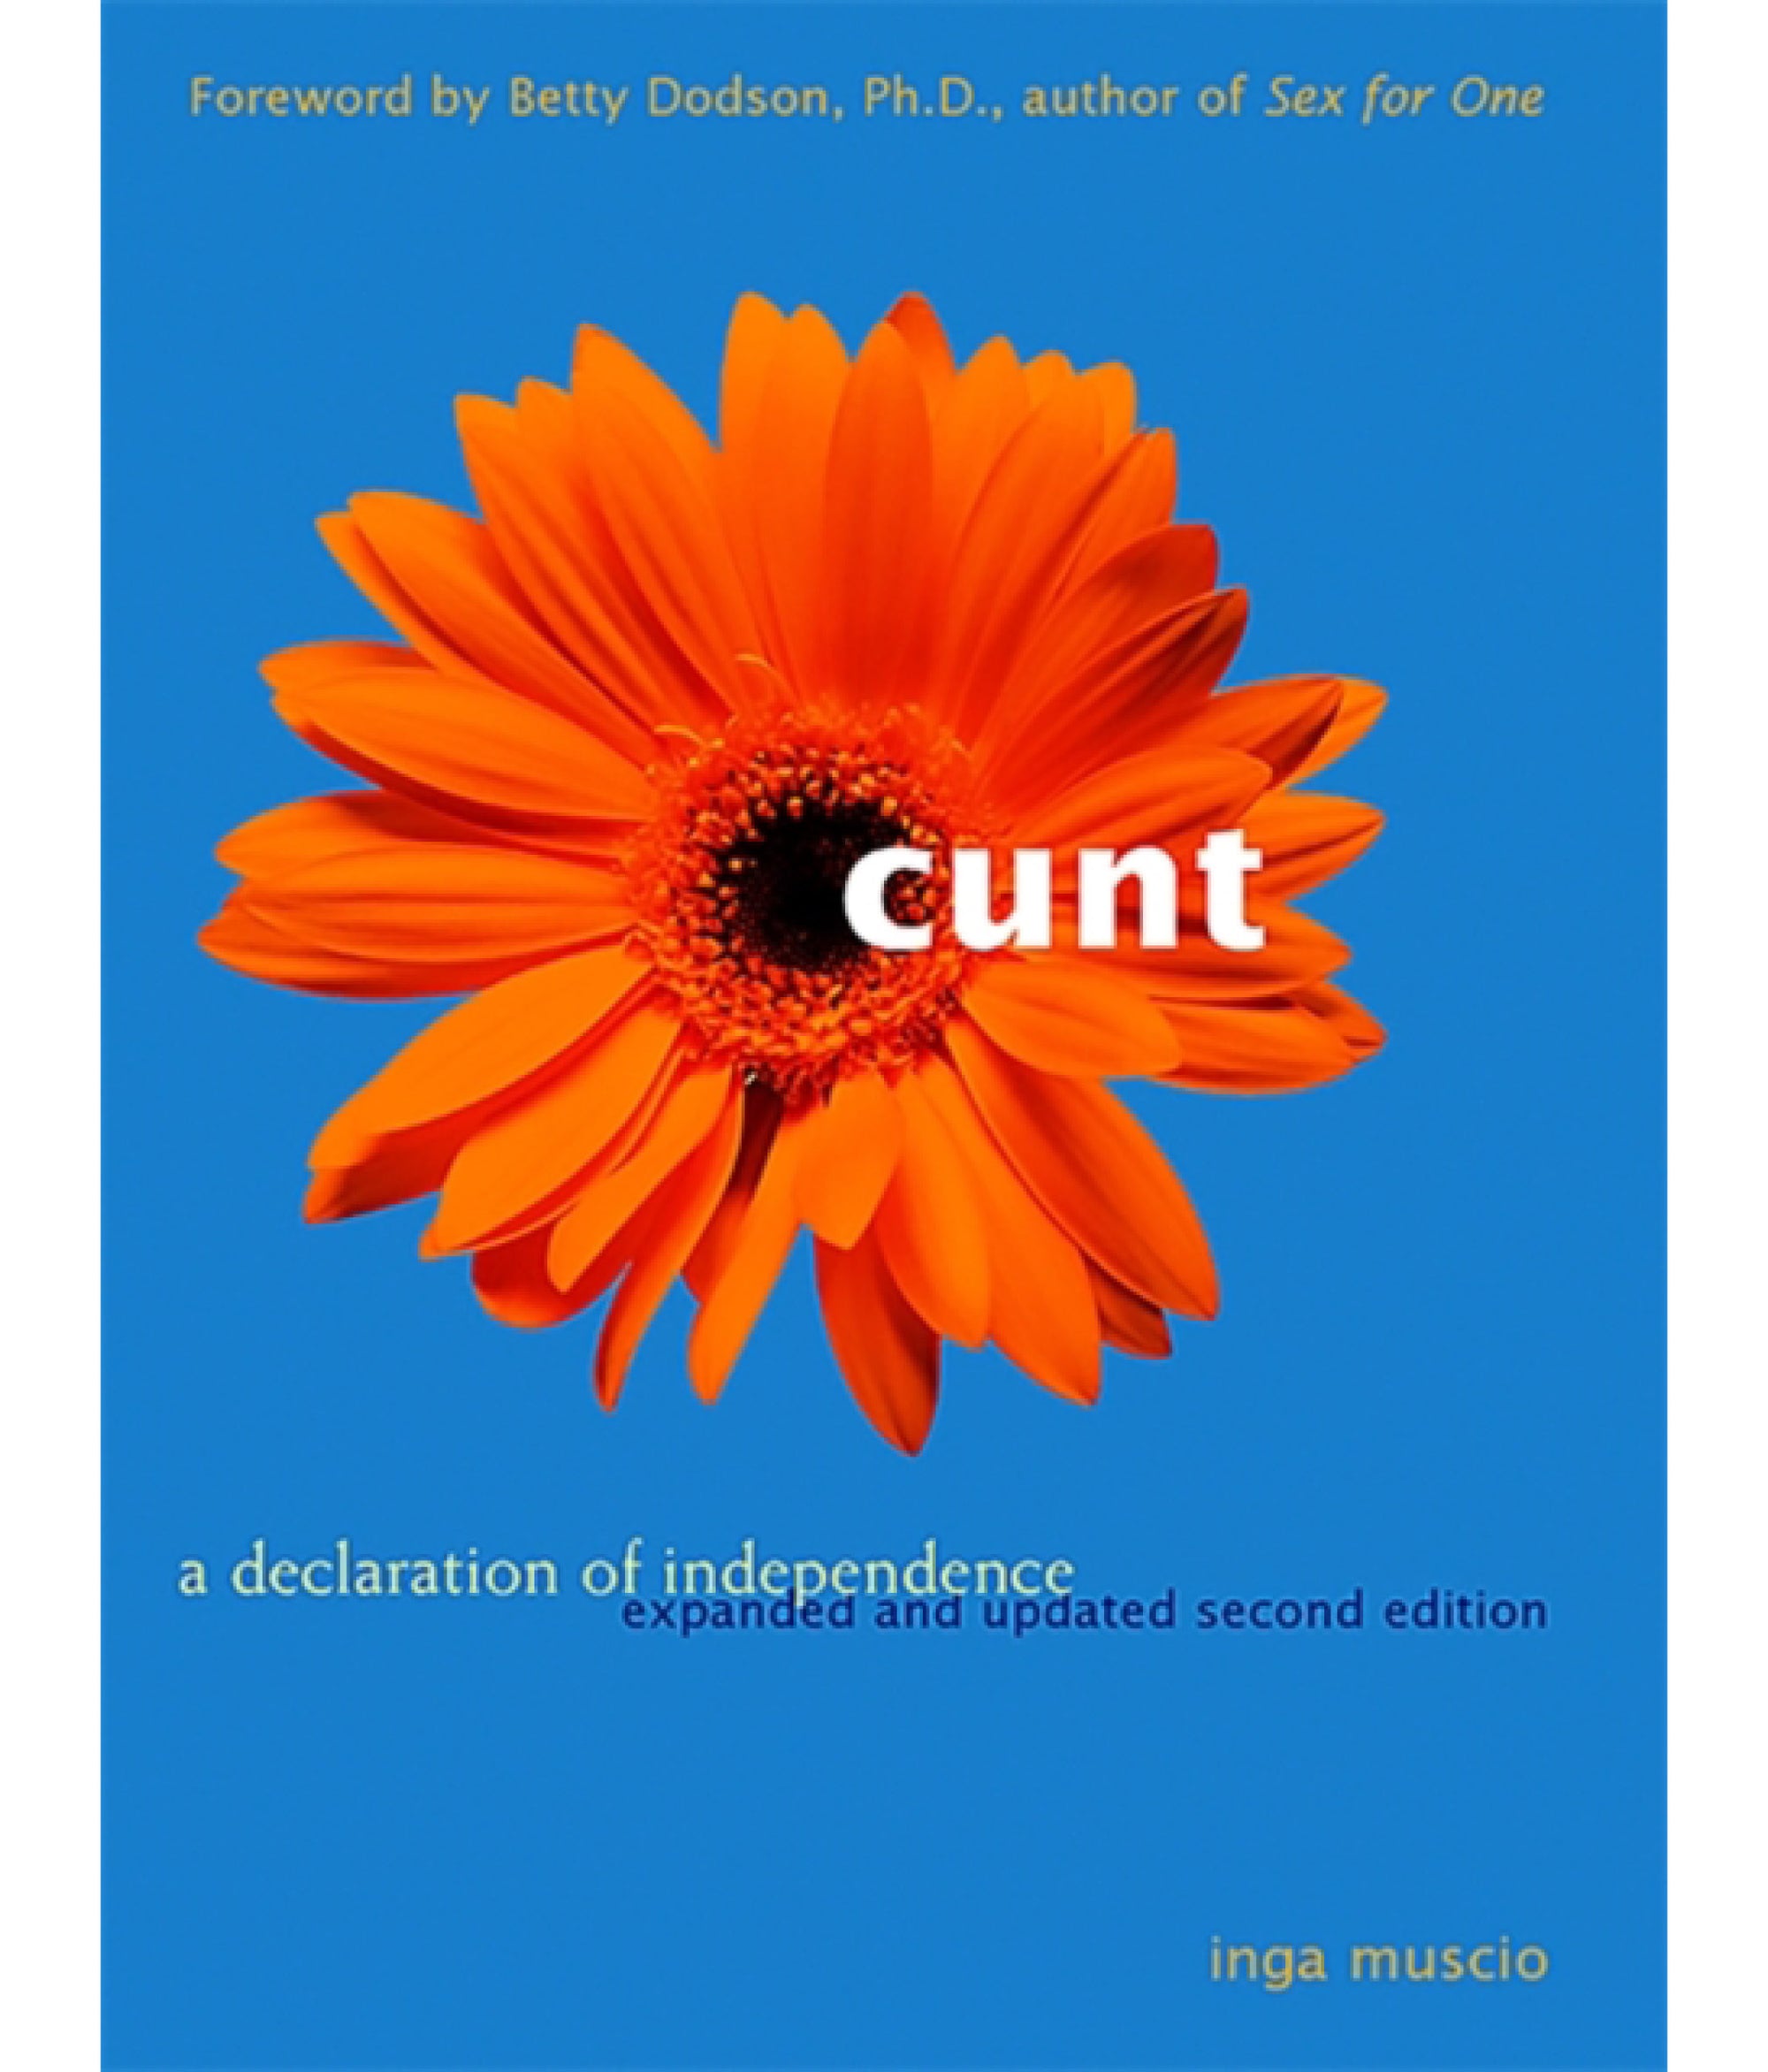 Cunt: a declaration of independence by Inga Muscio